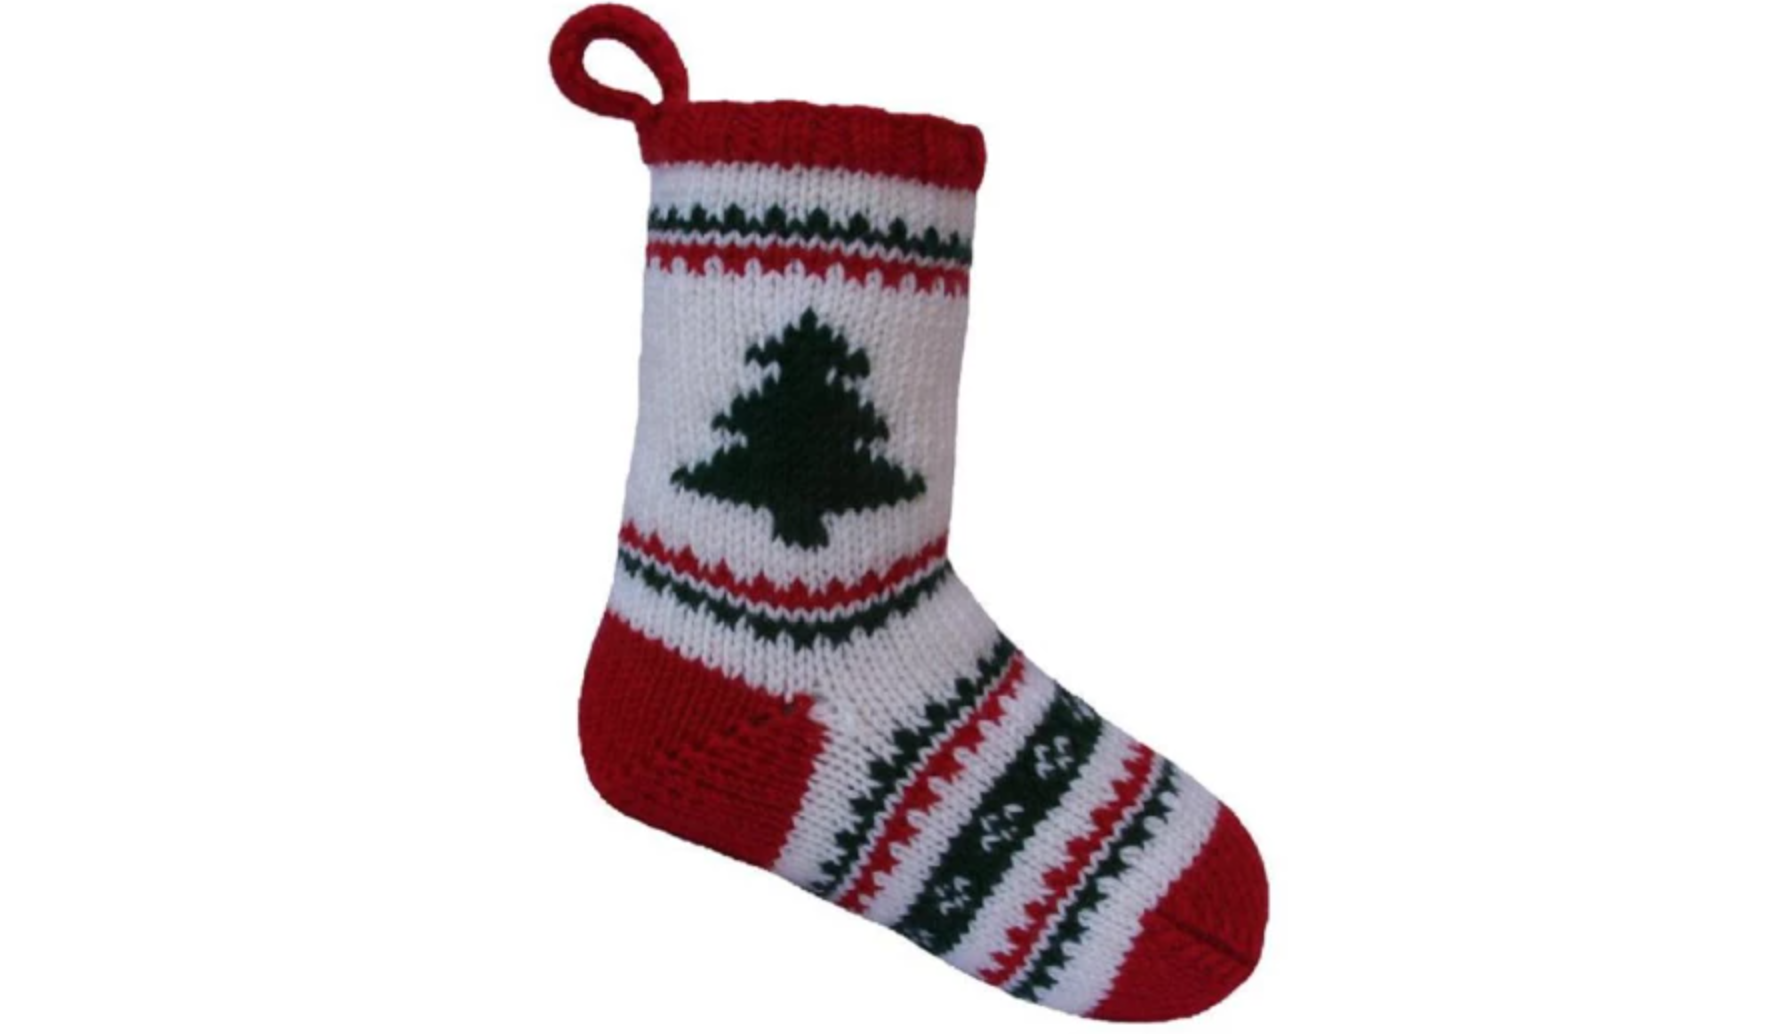 knit stocking with christmas tree pattern